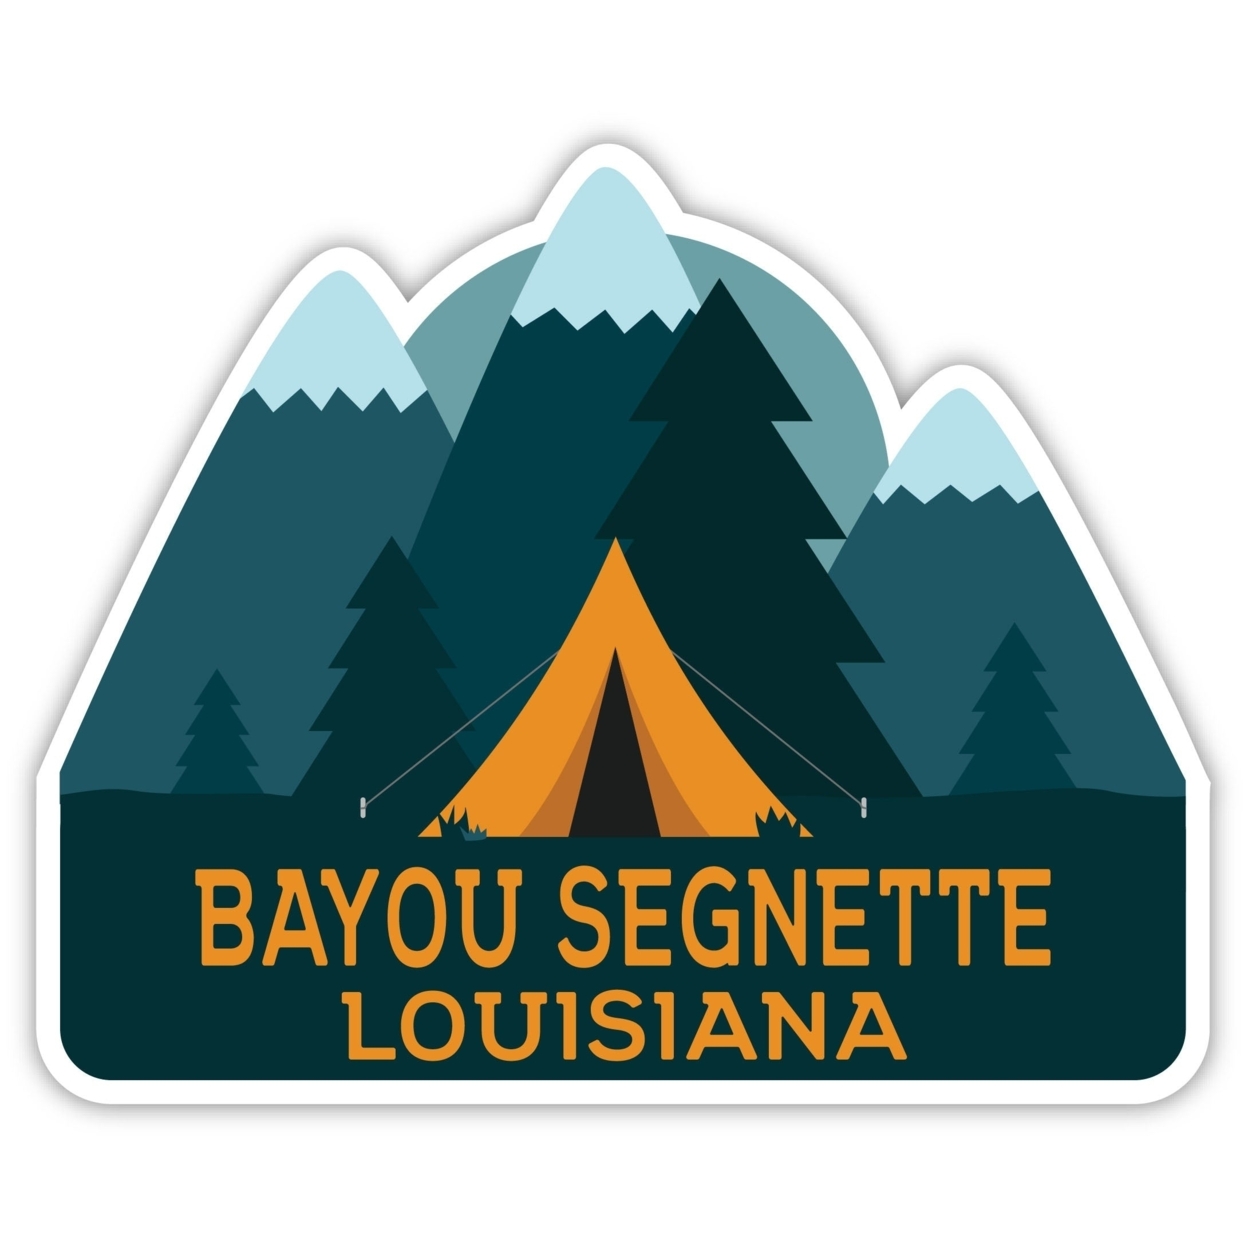 Bayou Segnette Louisiana Souvenir Decorative Stickers (Choose Theme And Size) - 4-Pack, 12-Inch, Tent